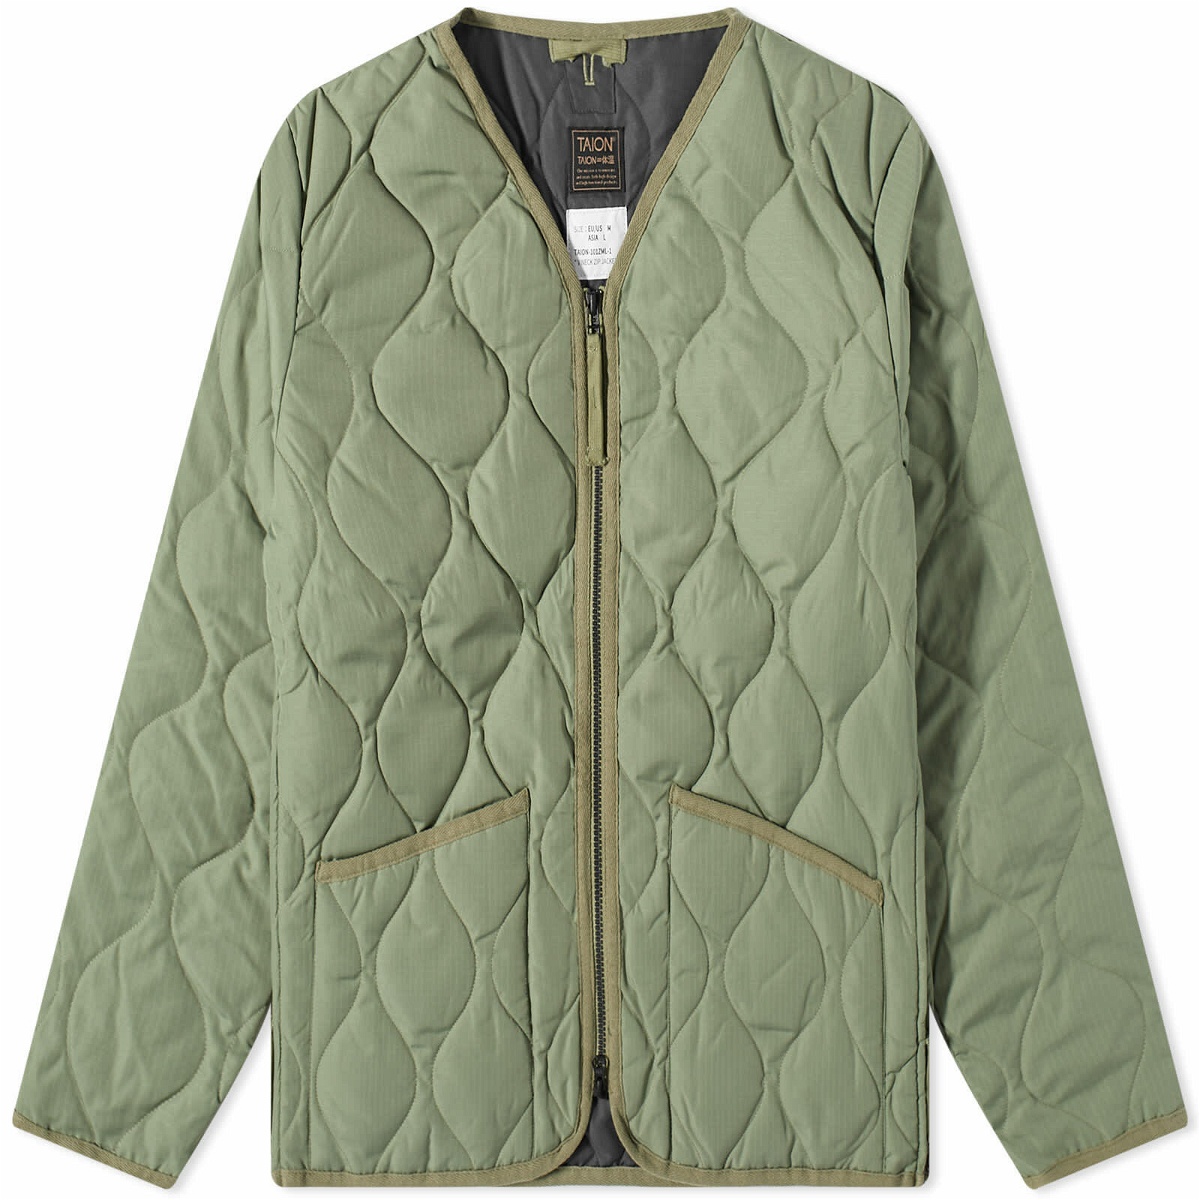 Taion Men's Military Zip Down Jacket in Sage Green Taion Extra